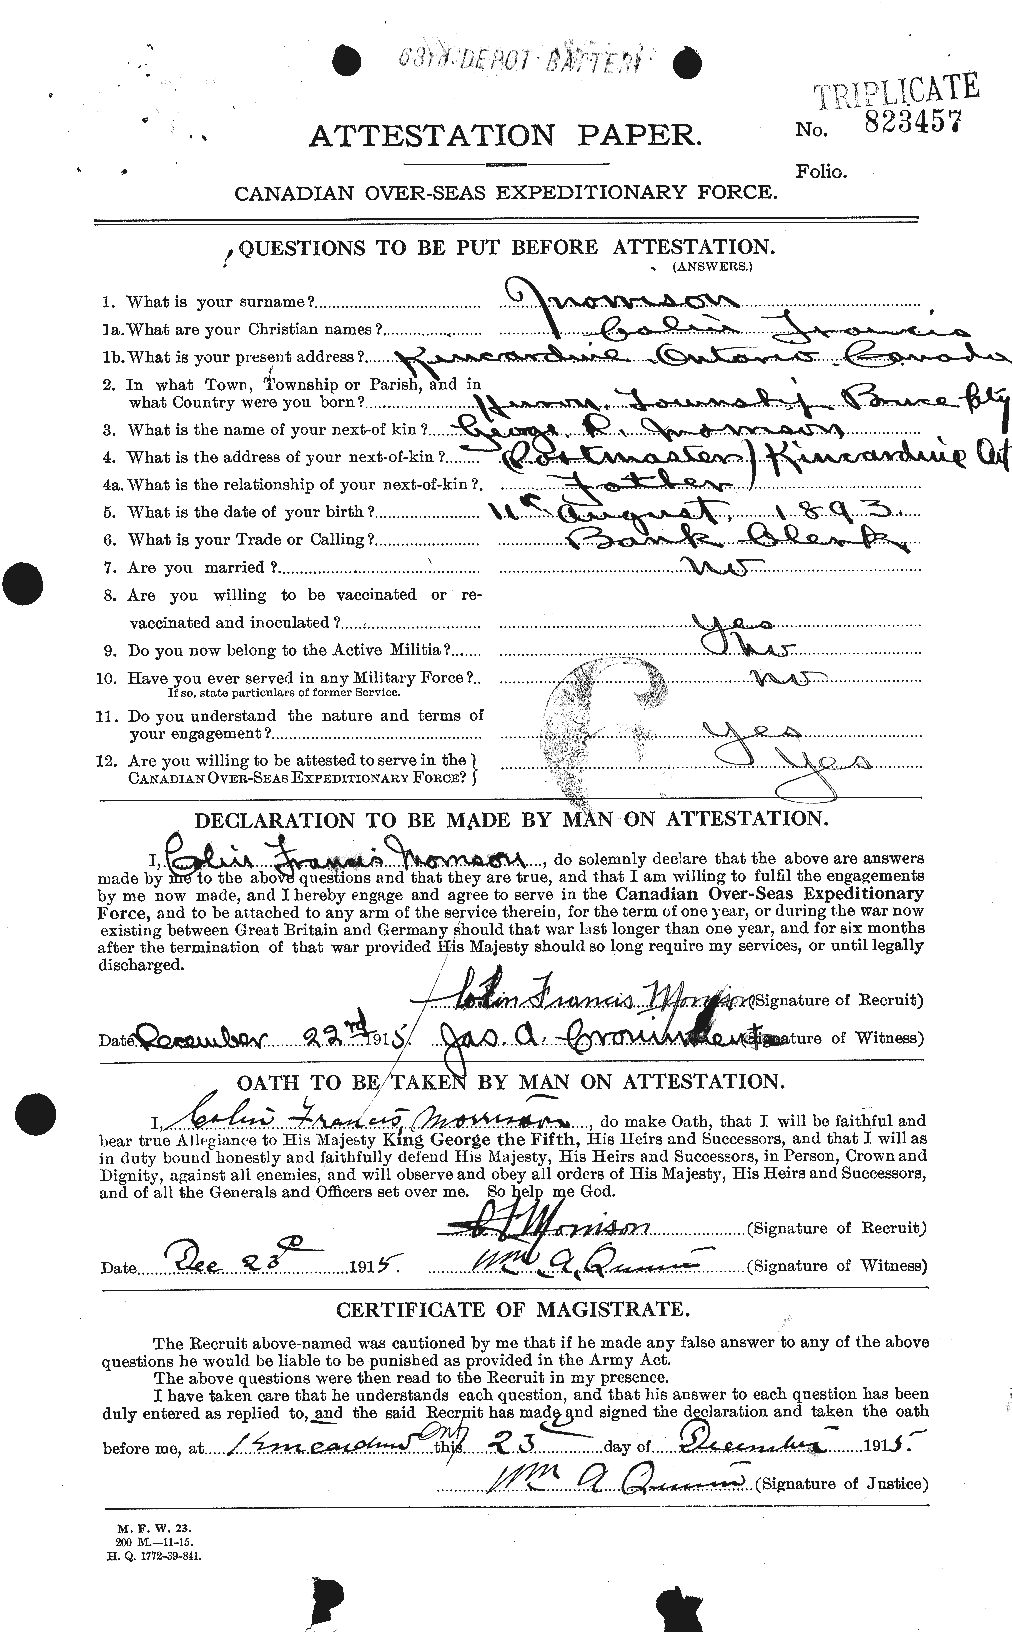 Personnel Records of the First World War - CEF 505385a